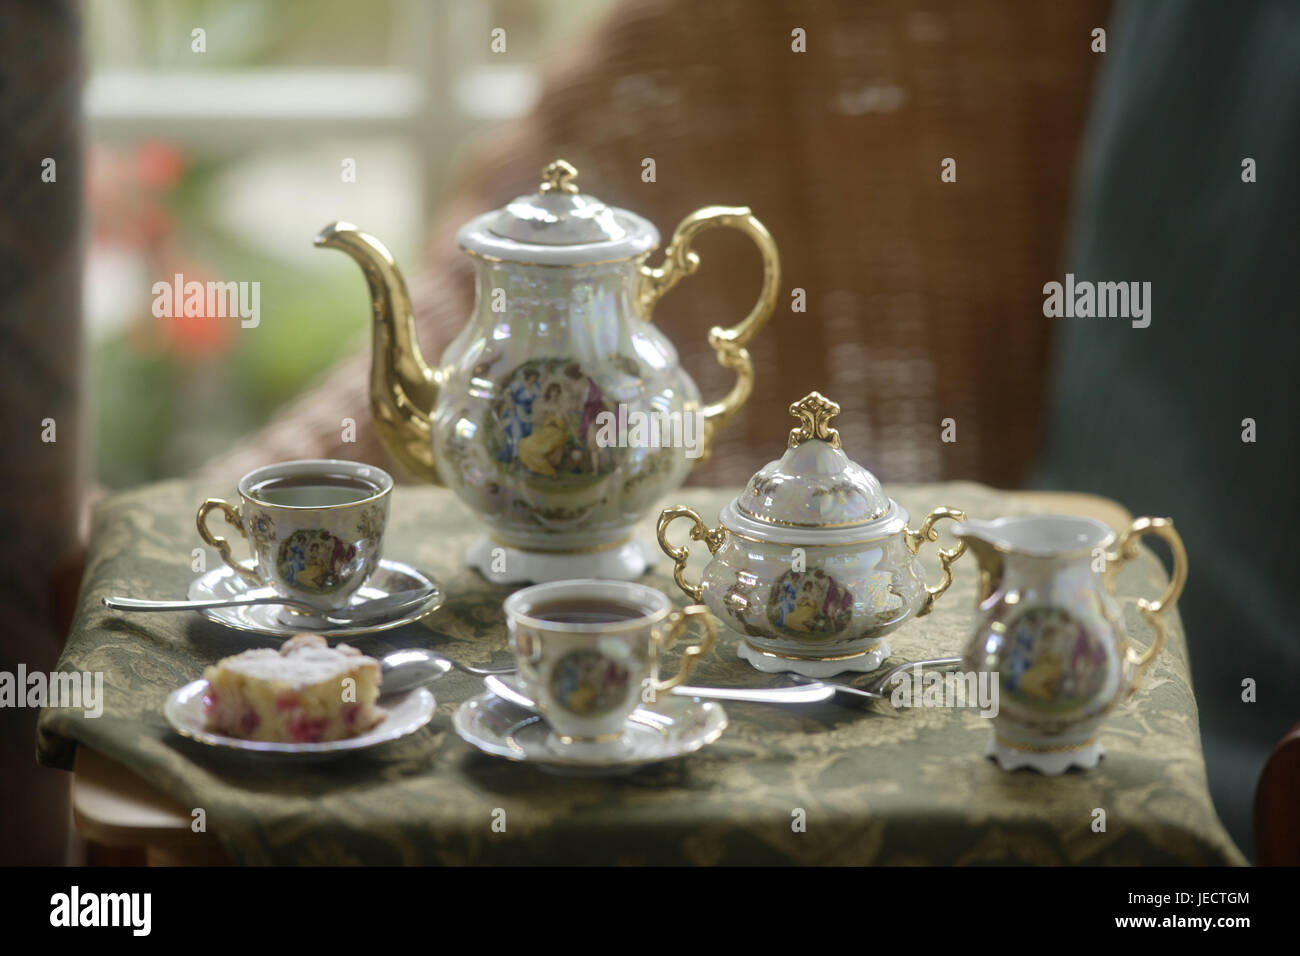 Table, tea service, elegantly, table caps, dishes, china, porcelain, nobly, white, golden, painted, nostalgically, teapot, pot, tea, cups, two, Teatime, tea drinking, sugar bowl, lacteal pot, collector's item, cake, object photography, Stock Photo